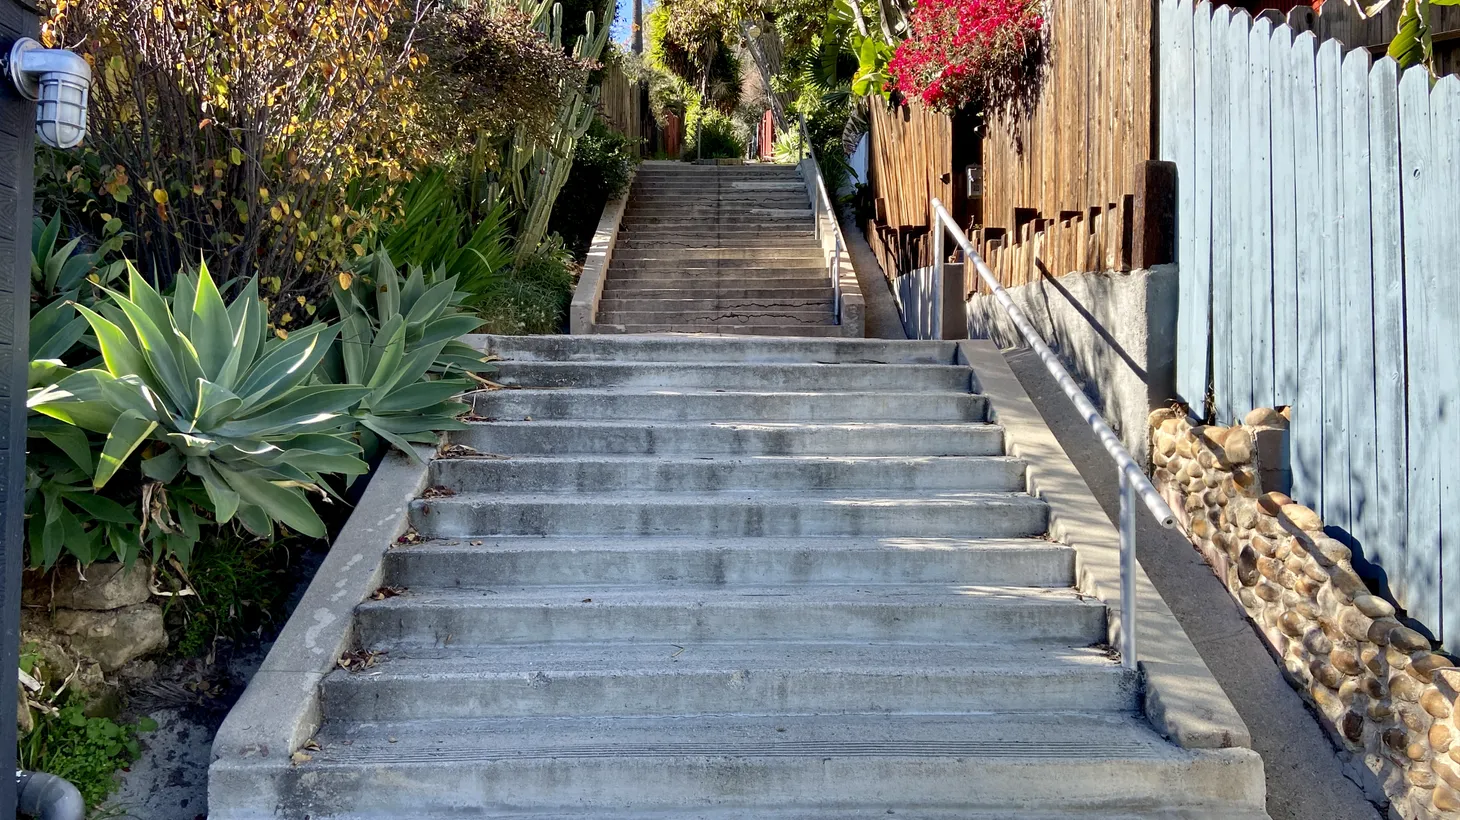 This view shows the first half of the Loma Vista stairs, the tallest stair street in Silver Lake.